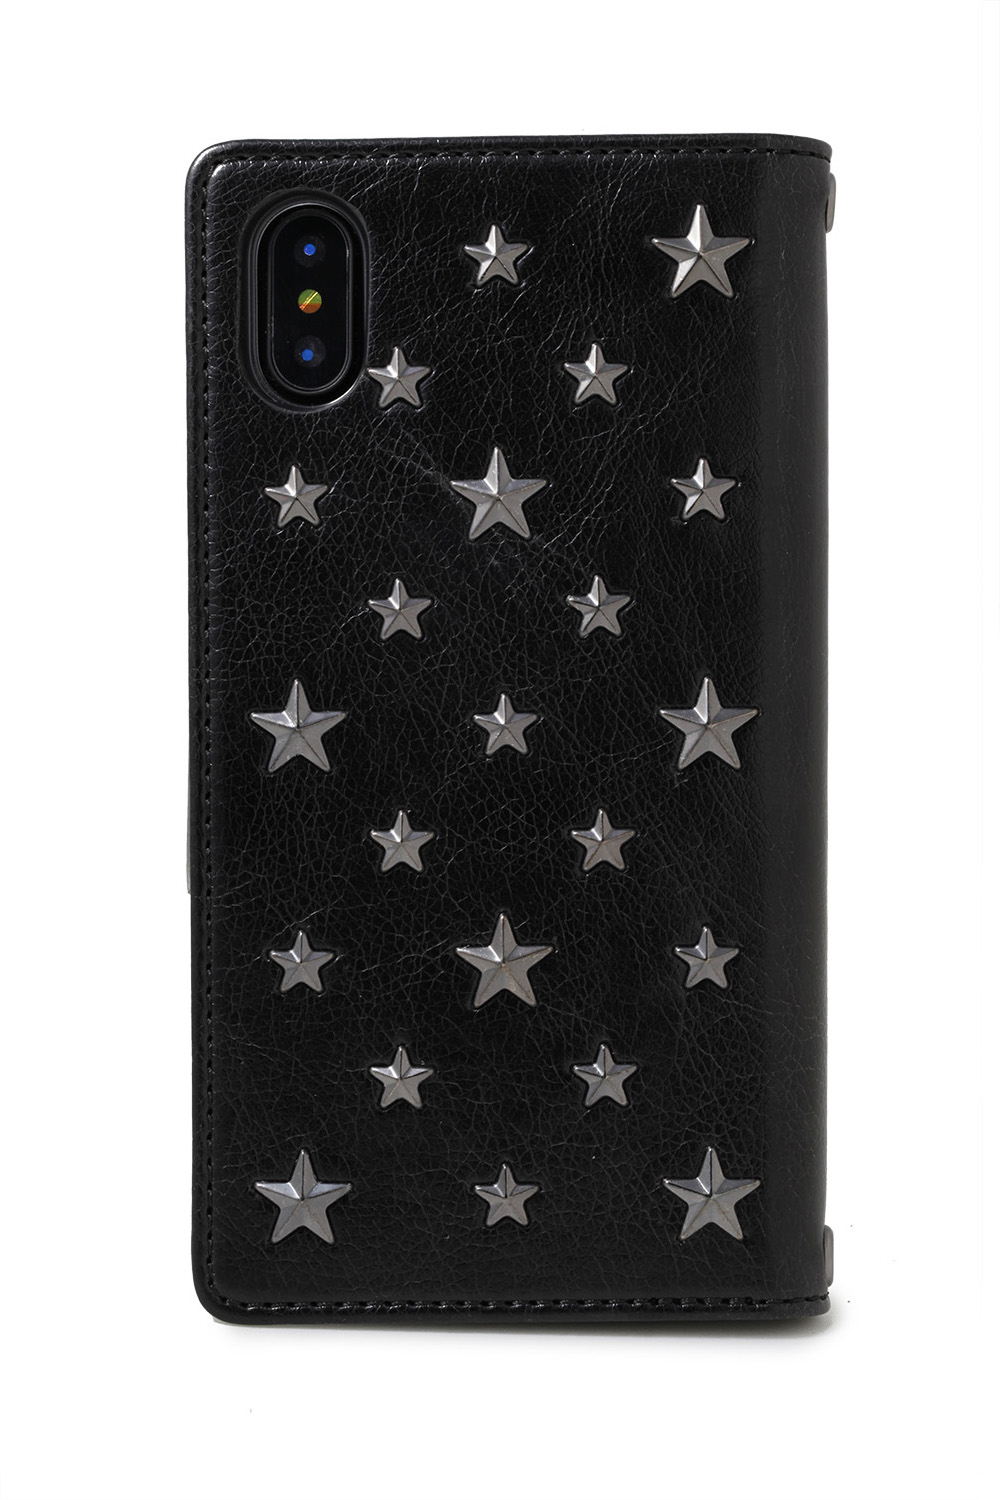 Star Studs 807 For iPhone X Case